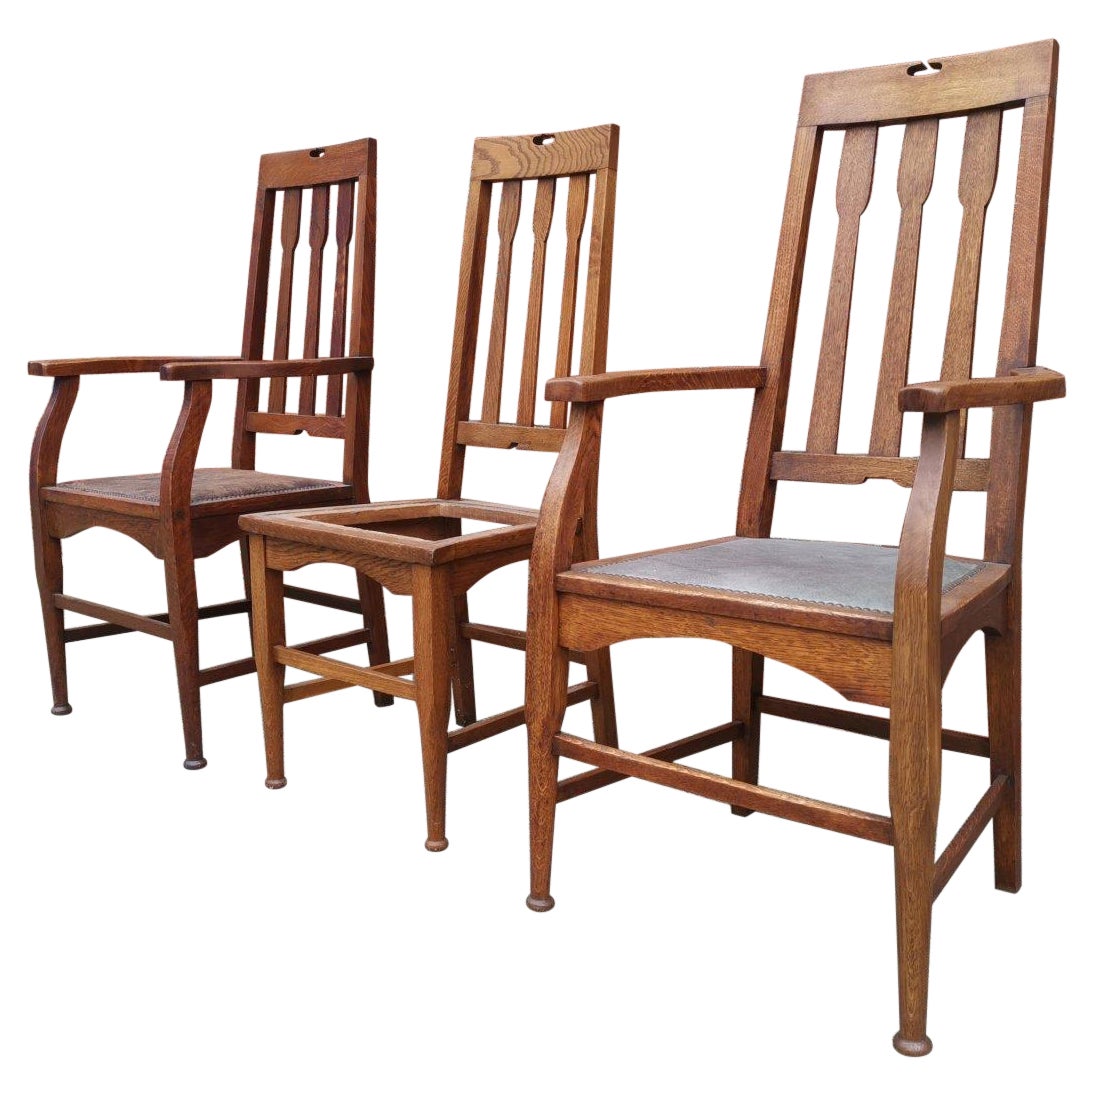 Two Glasgow Style Arts & Crafts Oak Armchairs & a Single Matching Dining Chair